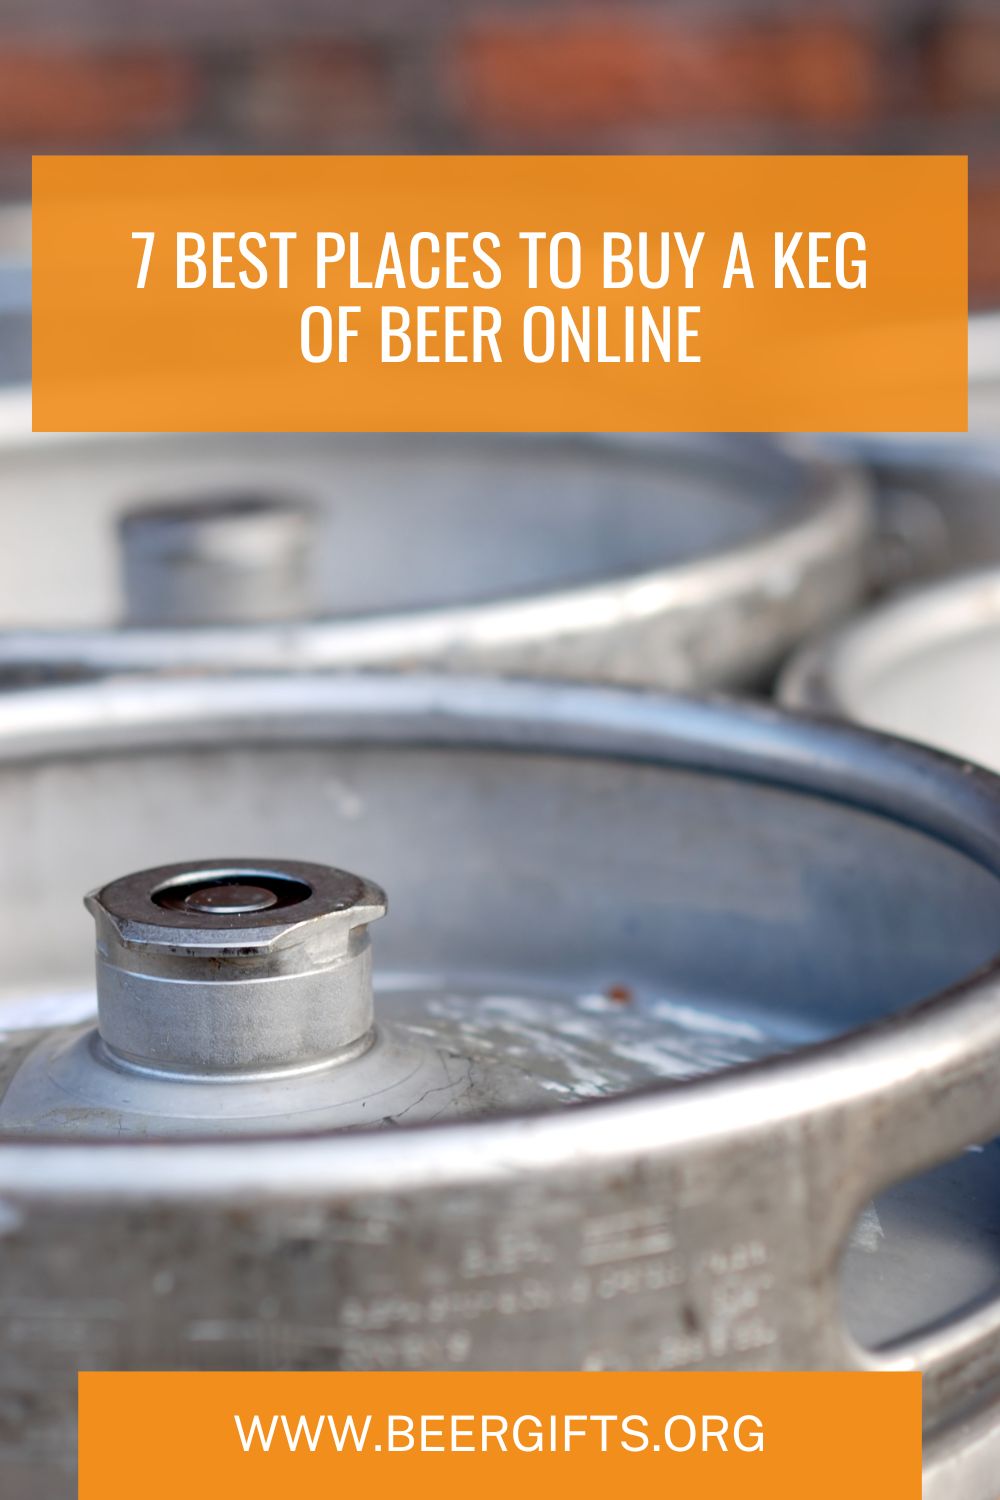 7 Best Places to Buy a Keg of Beer Online1